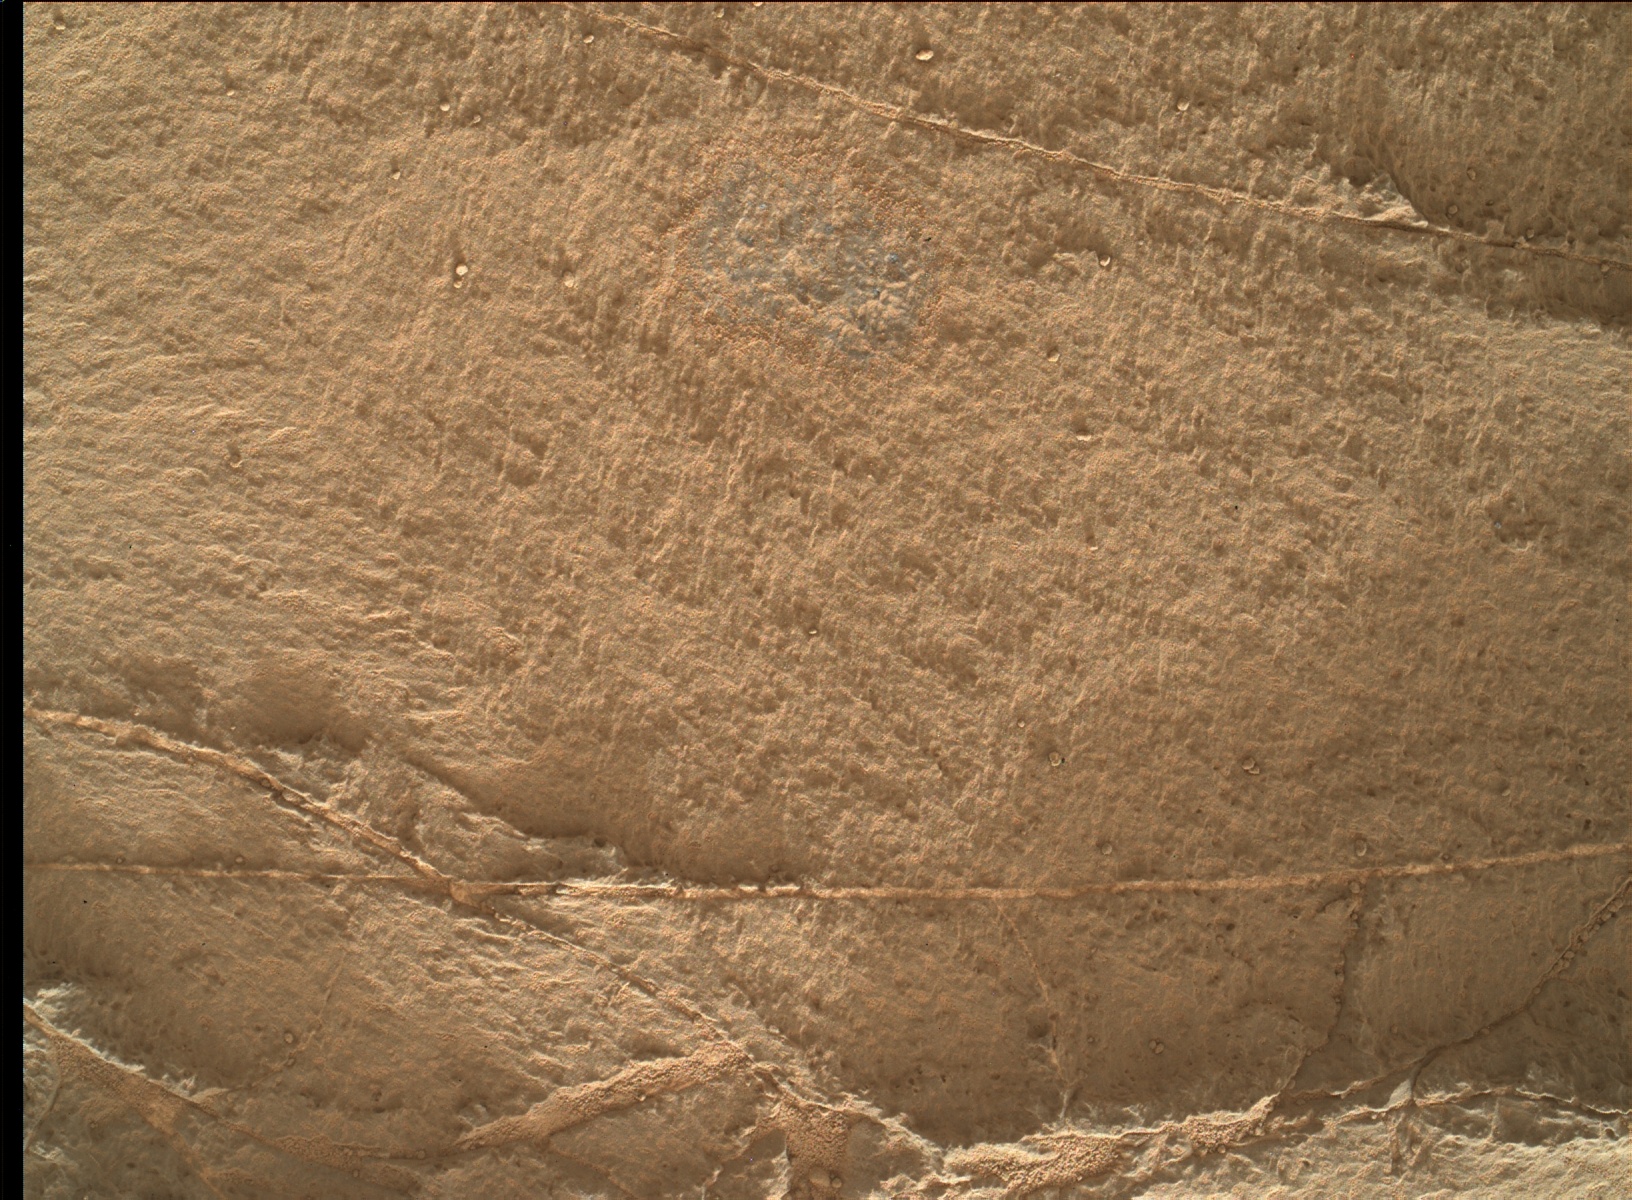 Nasa's Mars rover Curiosity acquired this image using its Mars Hand Lens Imager (MAHLI) on Sol 1355